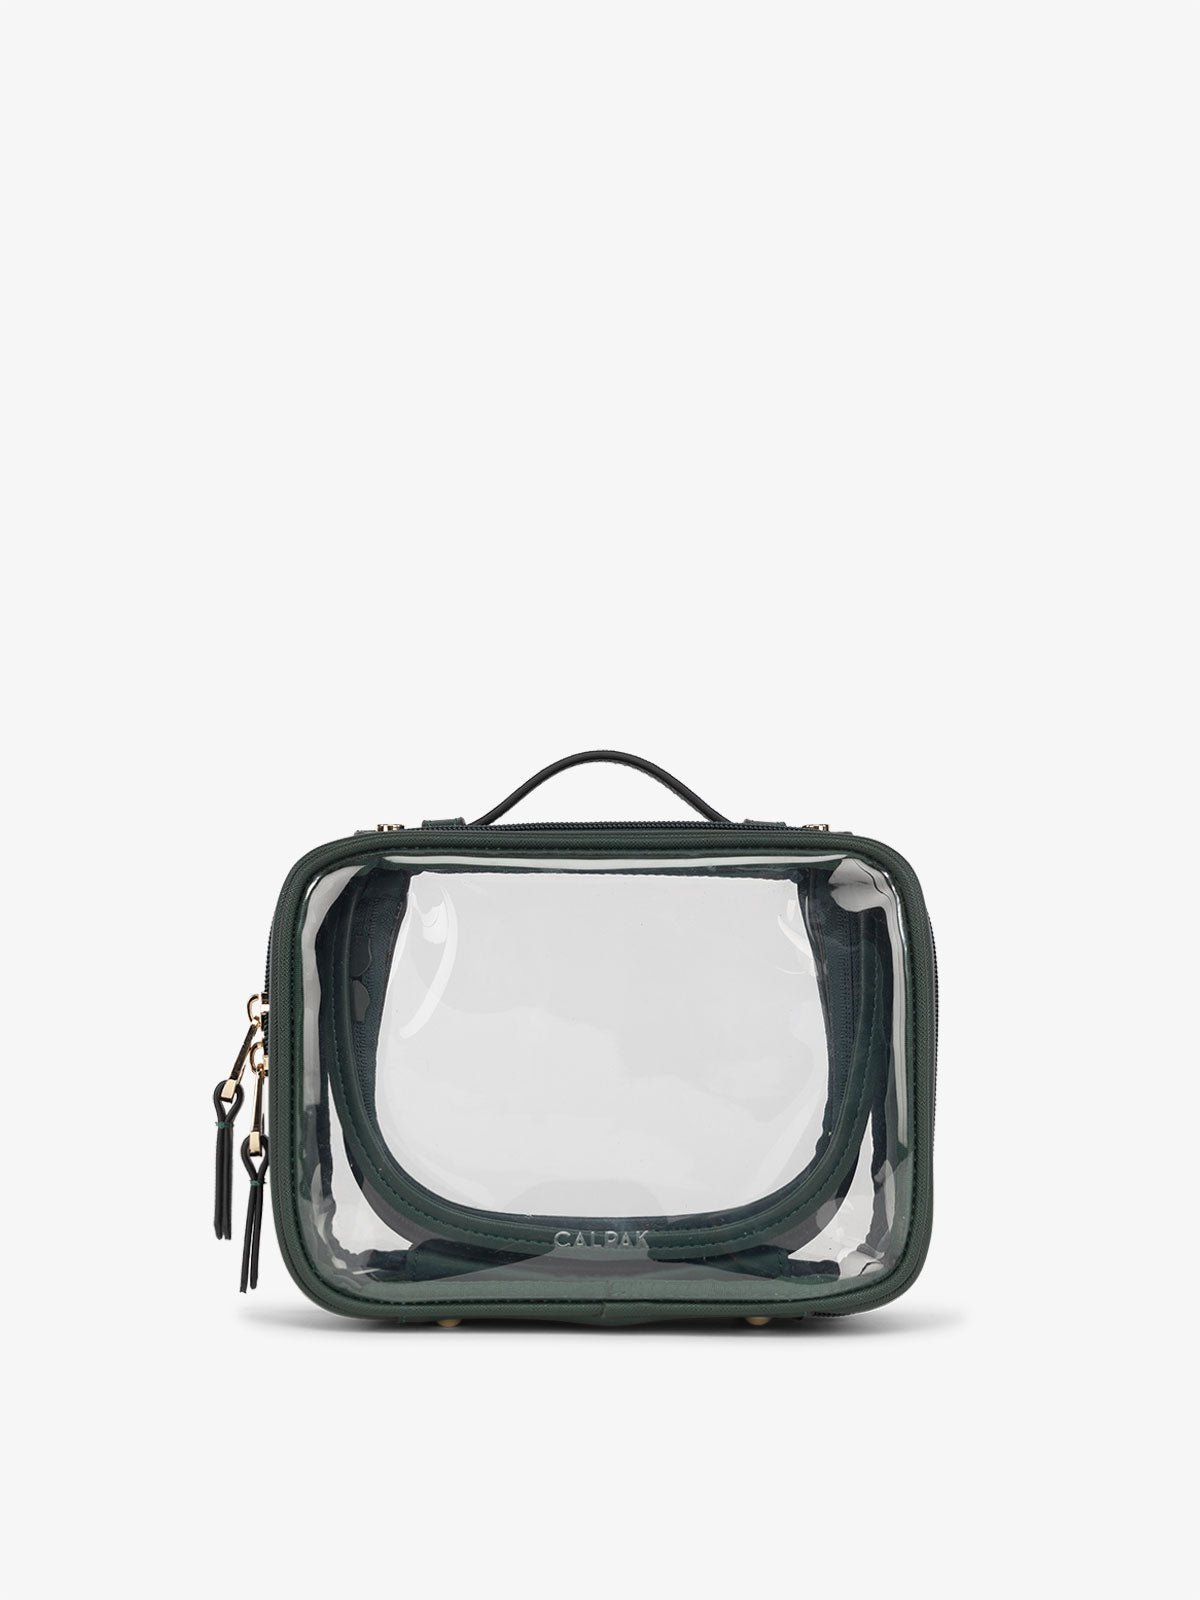 CALPAK small clear makeup bag with zippered compartments in green